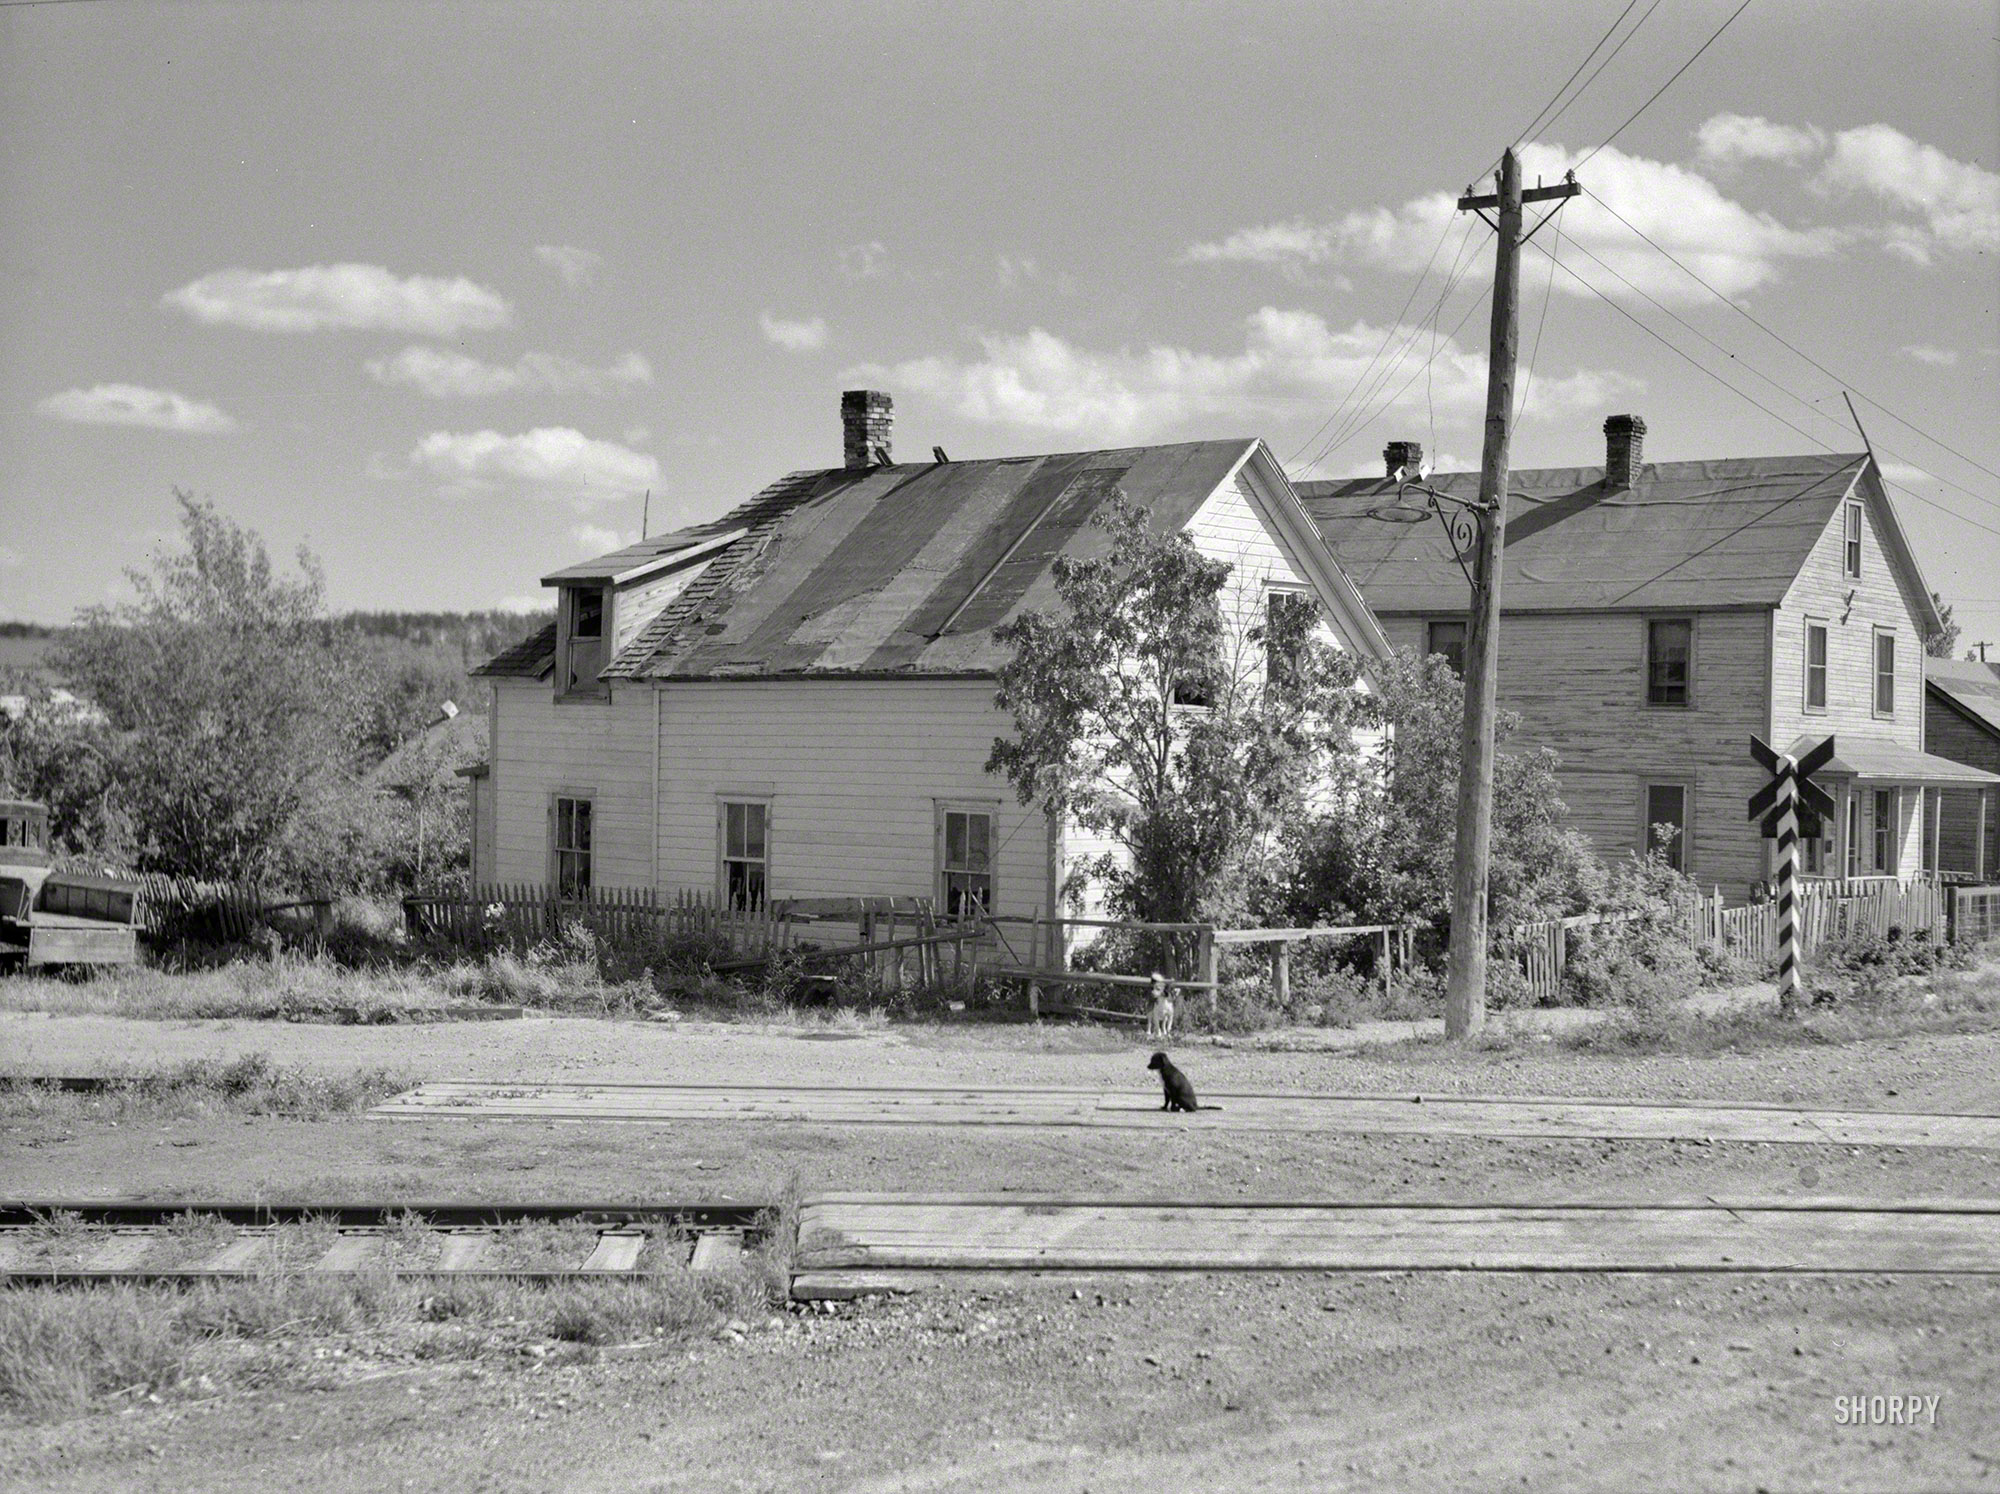 August 1937. "Houses in Winton, Minnesota -- lumber bust town." A two-house town, on a two-dog day. Another example of prolific shooter Russell Lee's work. Medium-format negative for the Resettlement Administration. View full size.